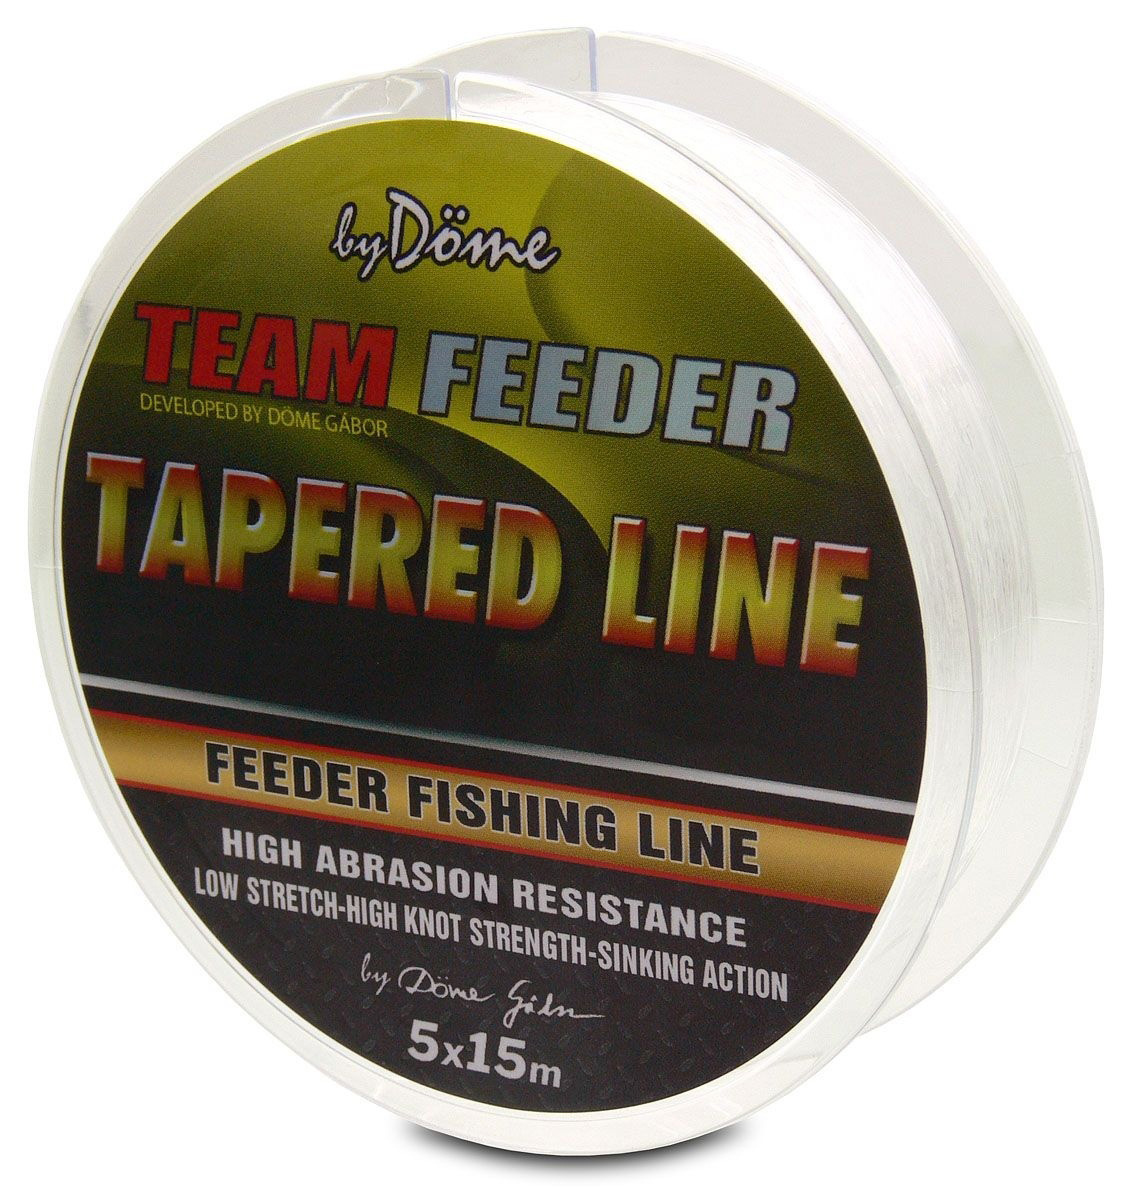 BY DÖME TEAM FEEDER TAPERED LINE 0,20-0,31MM